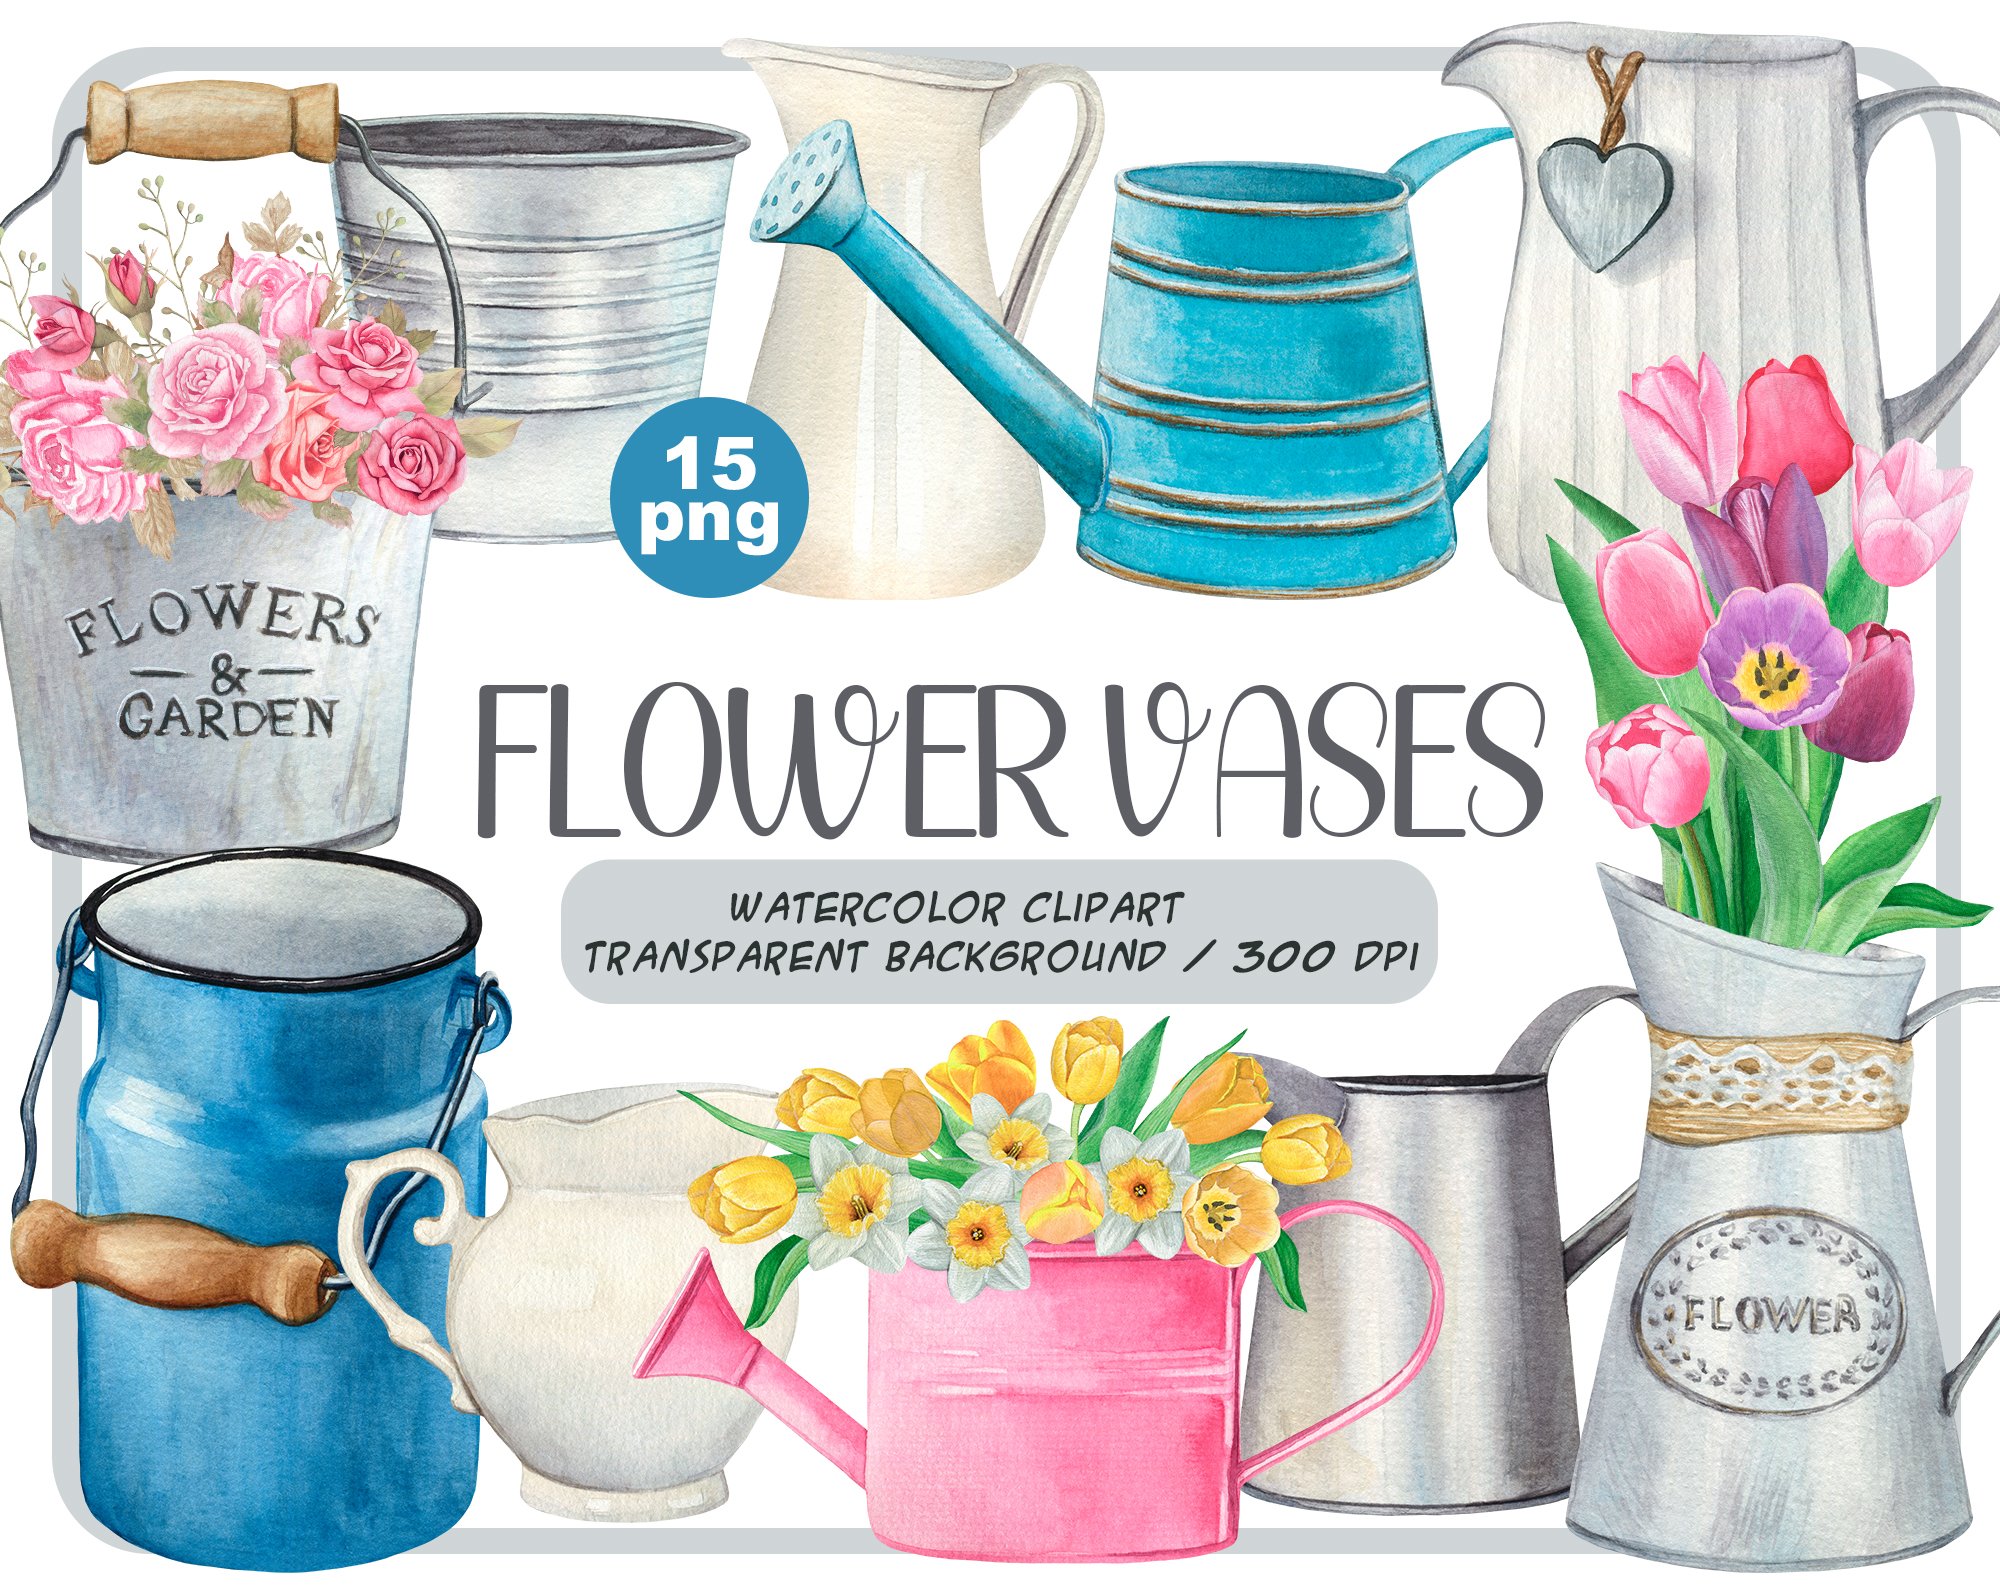 Watercolor flower vases clipart cover image.